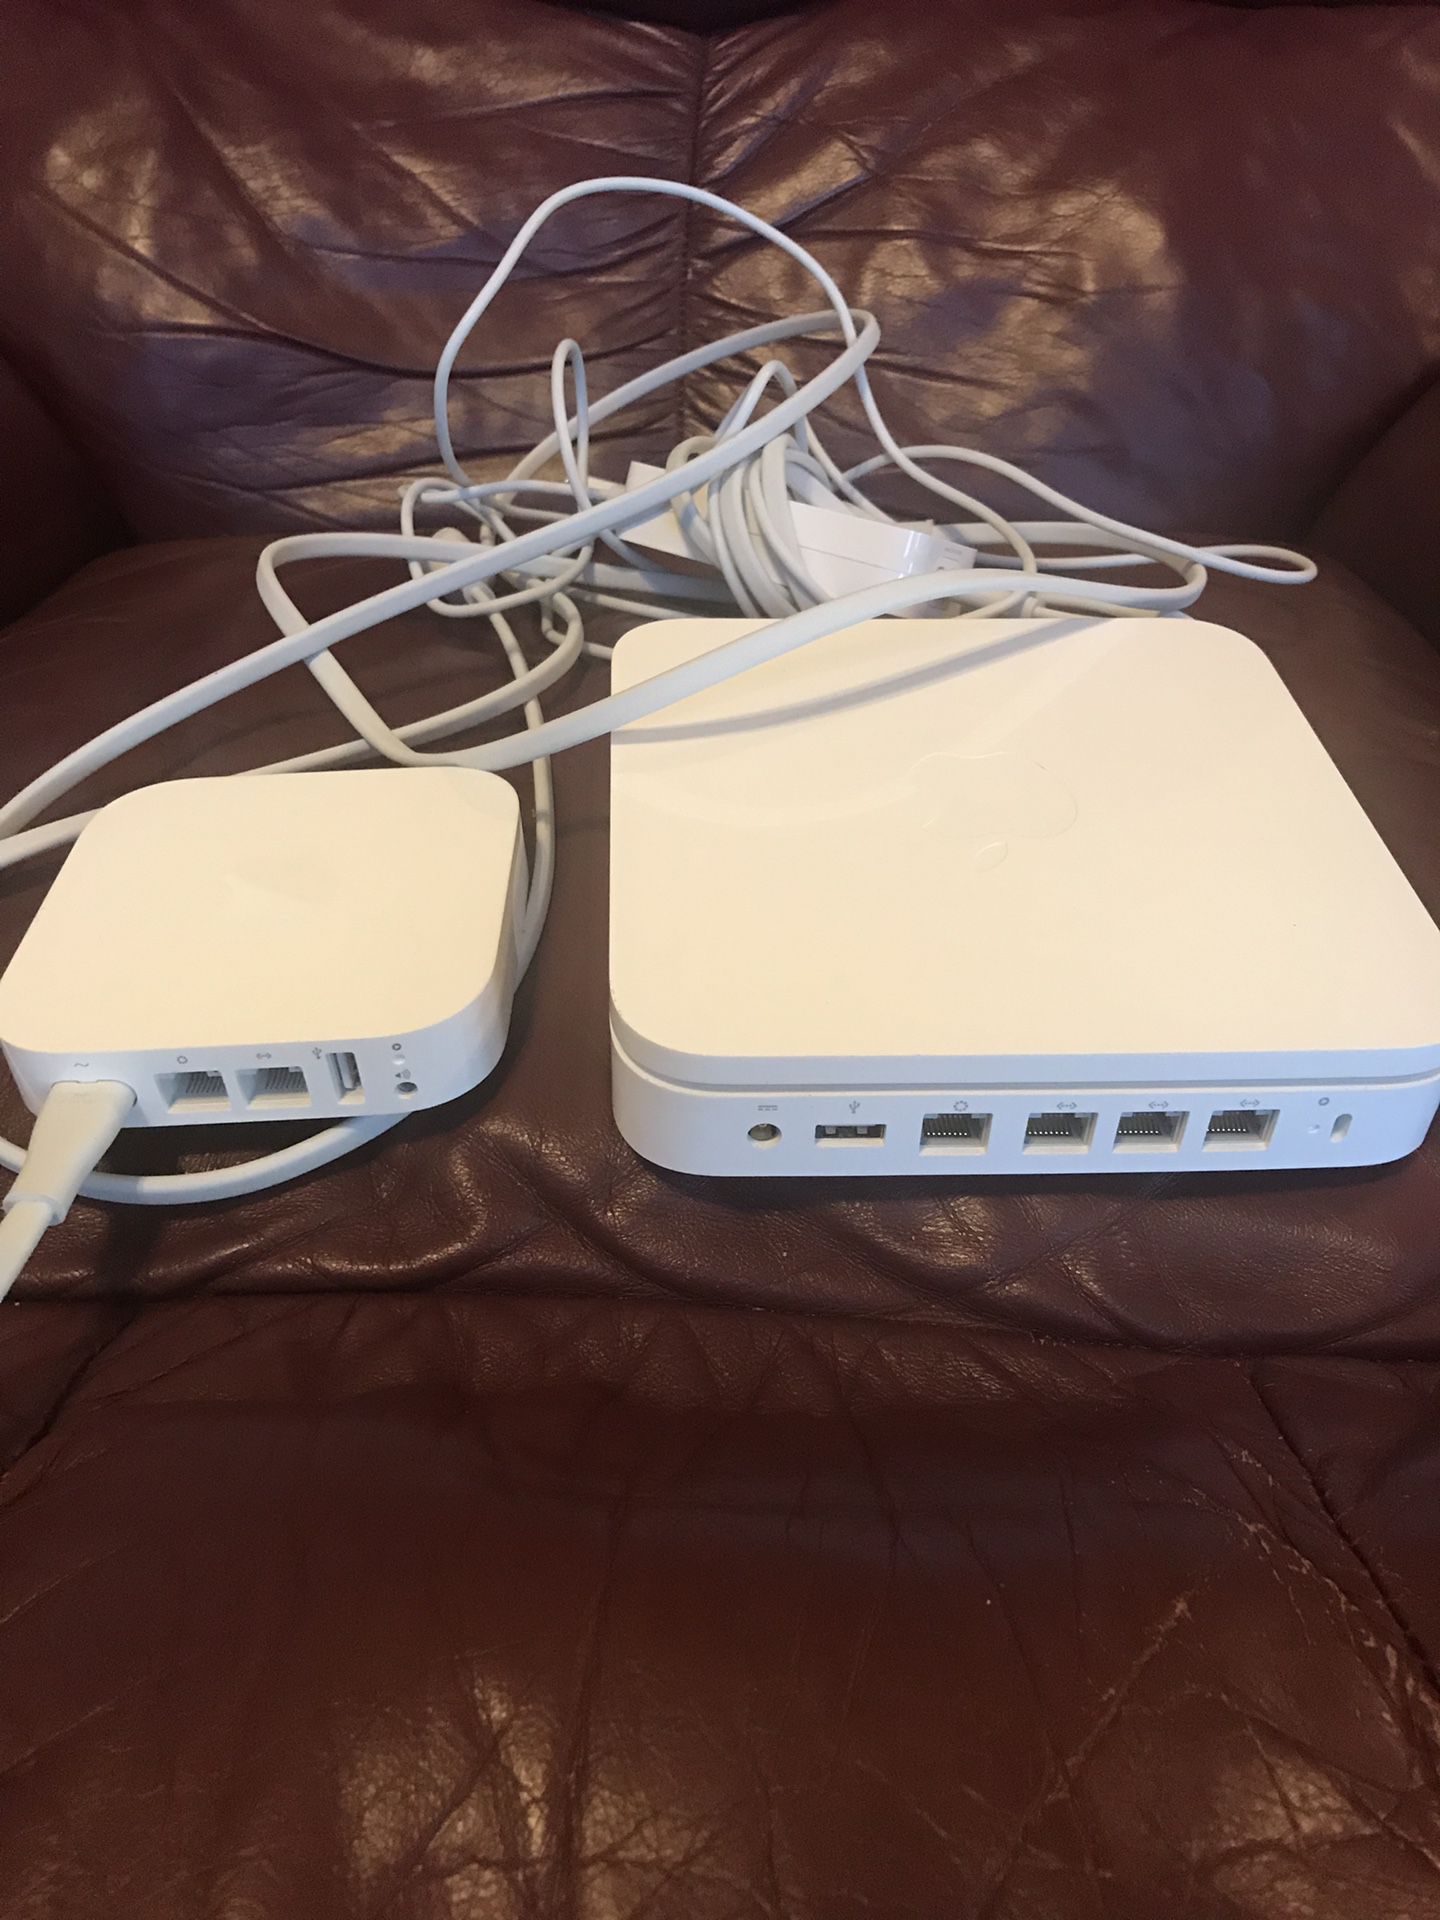 Price reduction! Bundle: Apple AirPort Extreme Base Station (WiFi Router), 2011 and Apple Airport Express